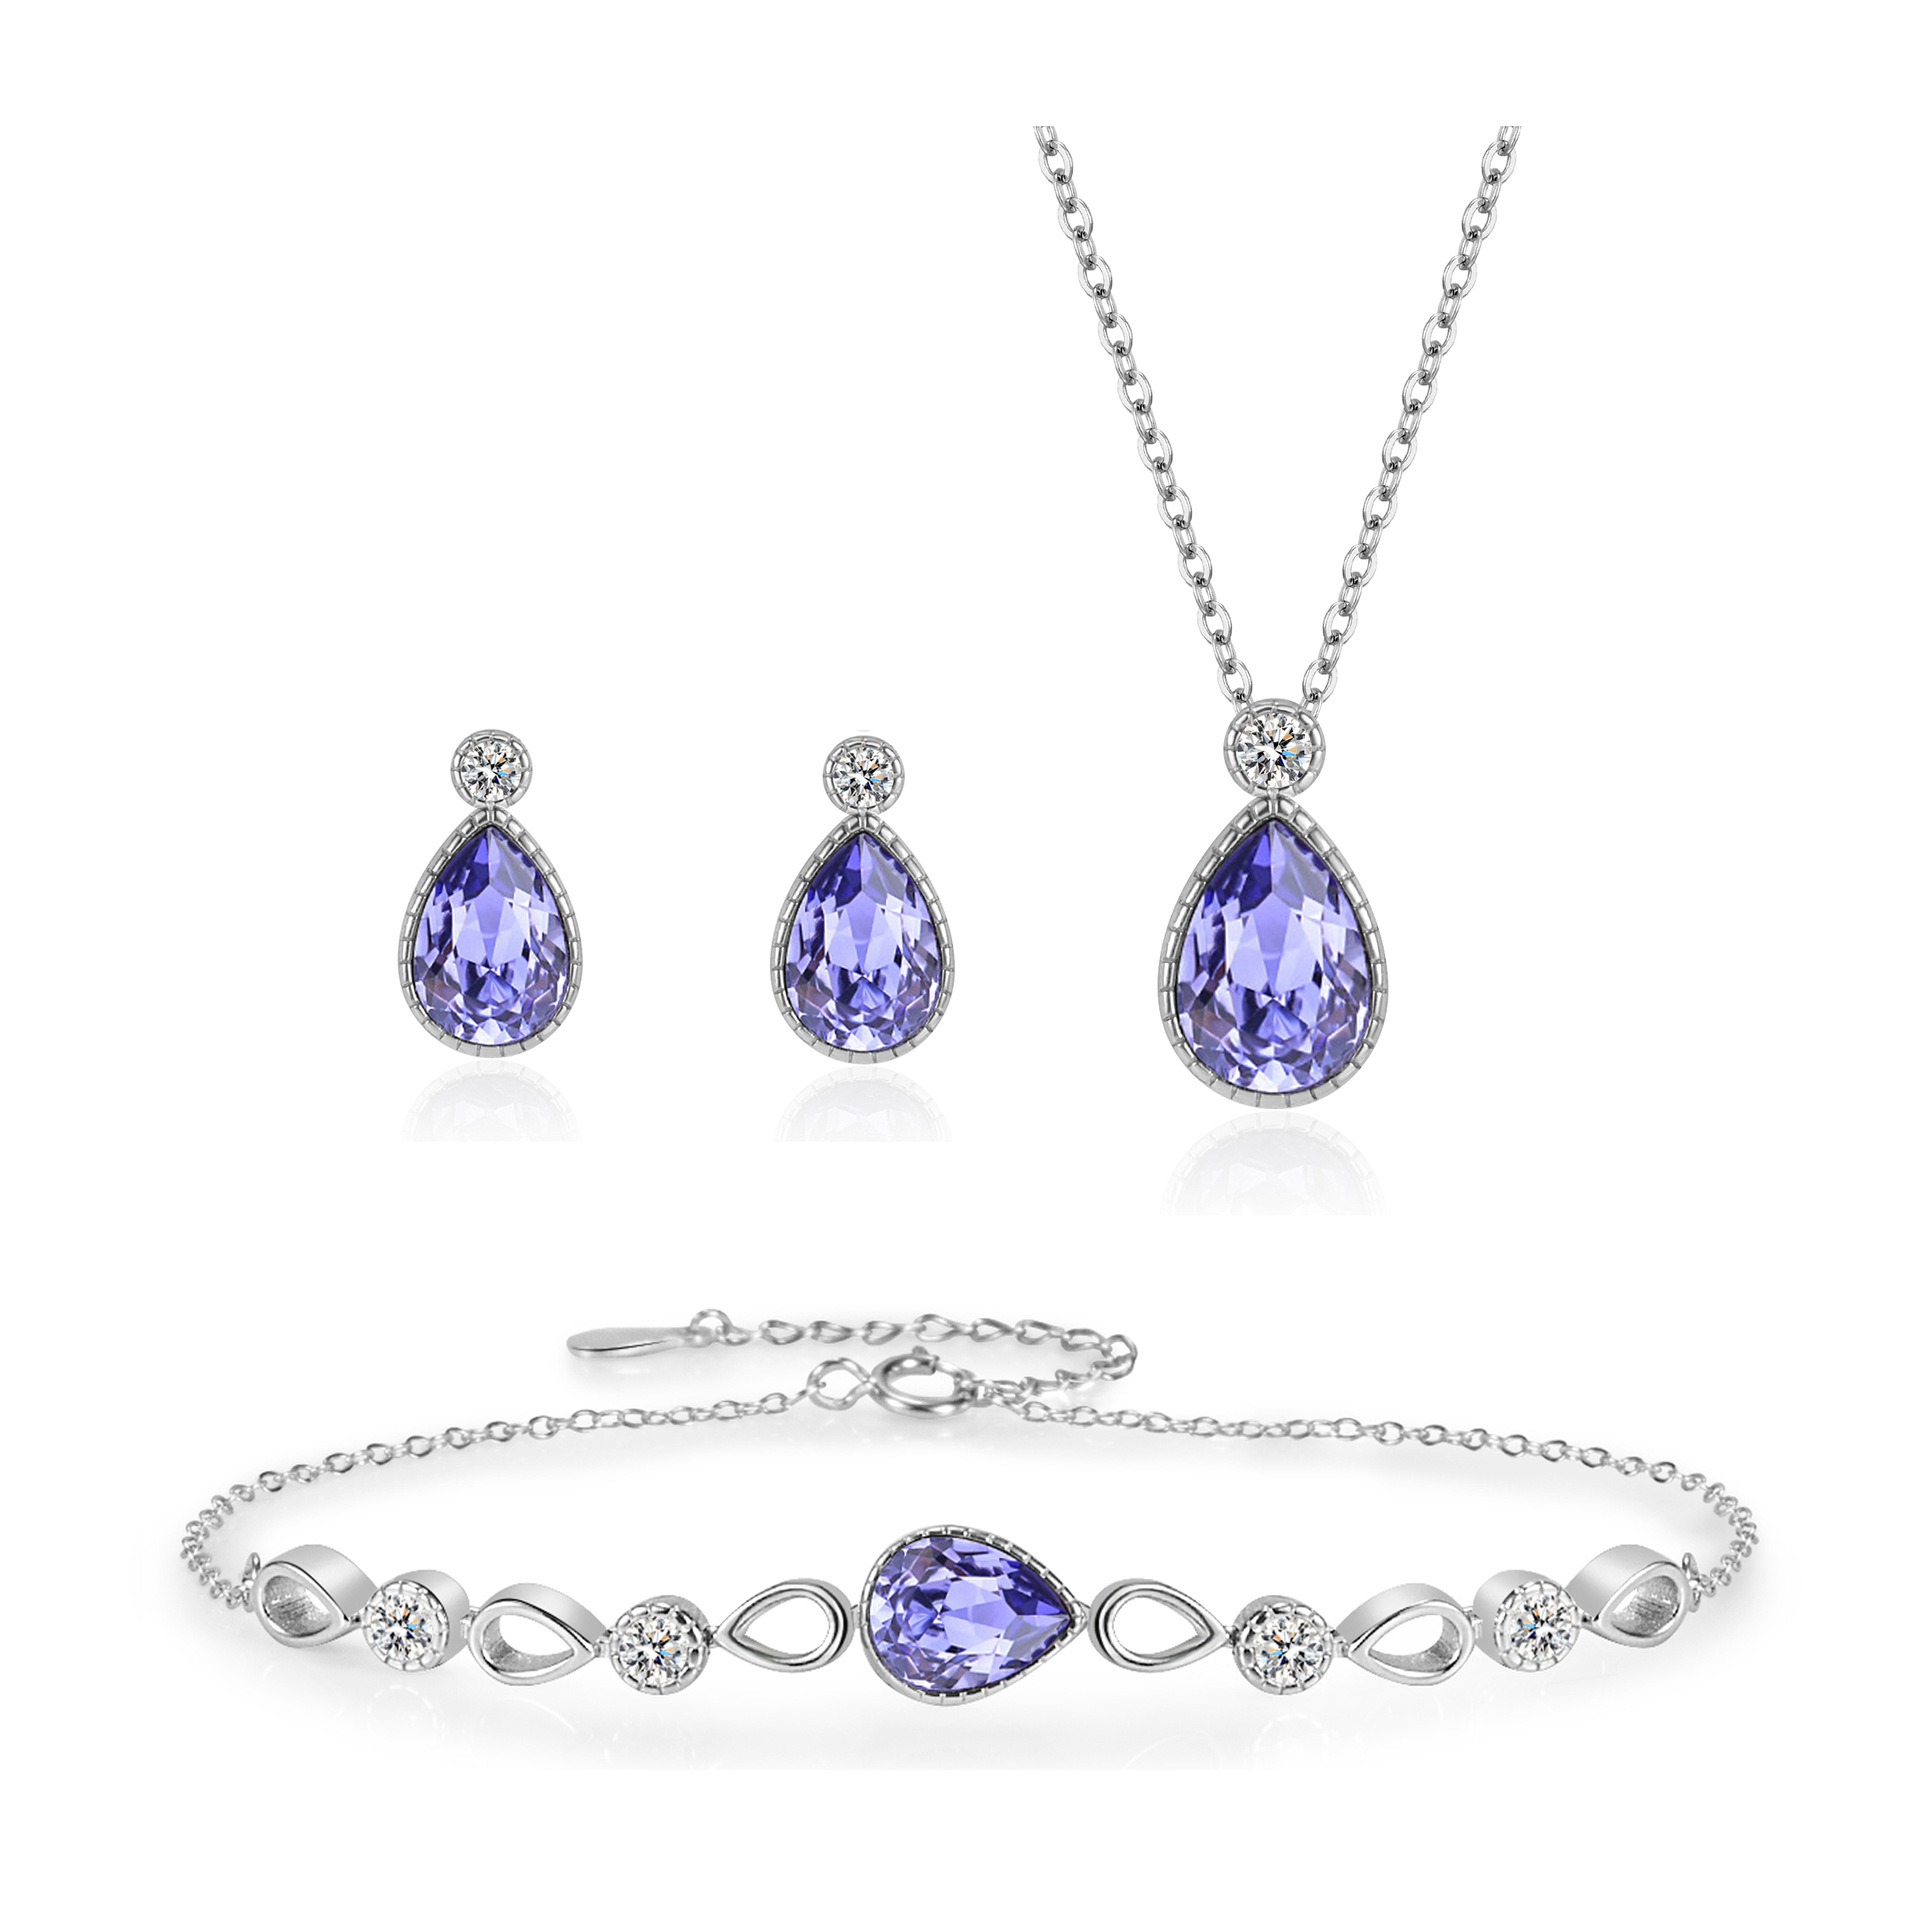 Sterling Silver Tears of the Mermaid Jewelry Set: Exquisite Crystal Adornments for Women